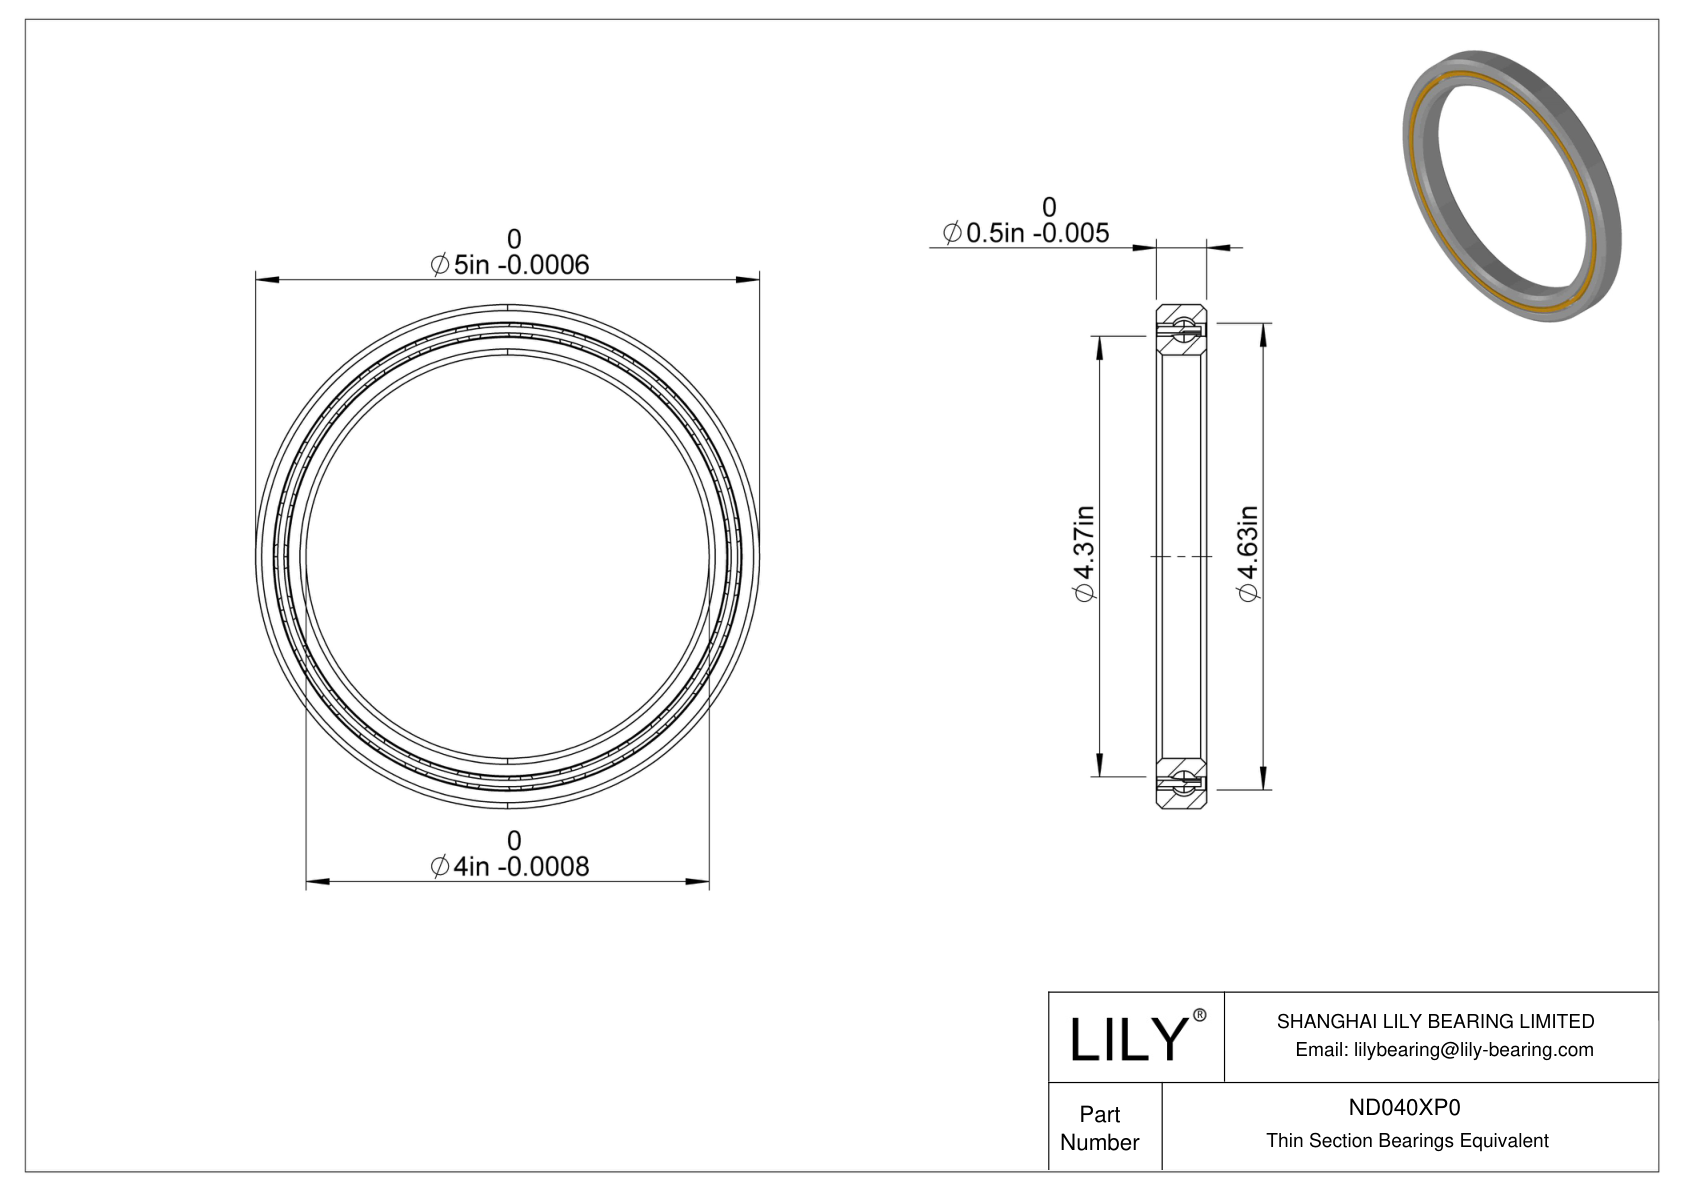 ND040XP0 Constant Section (CS) Bearings cad drawing